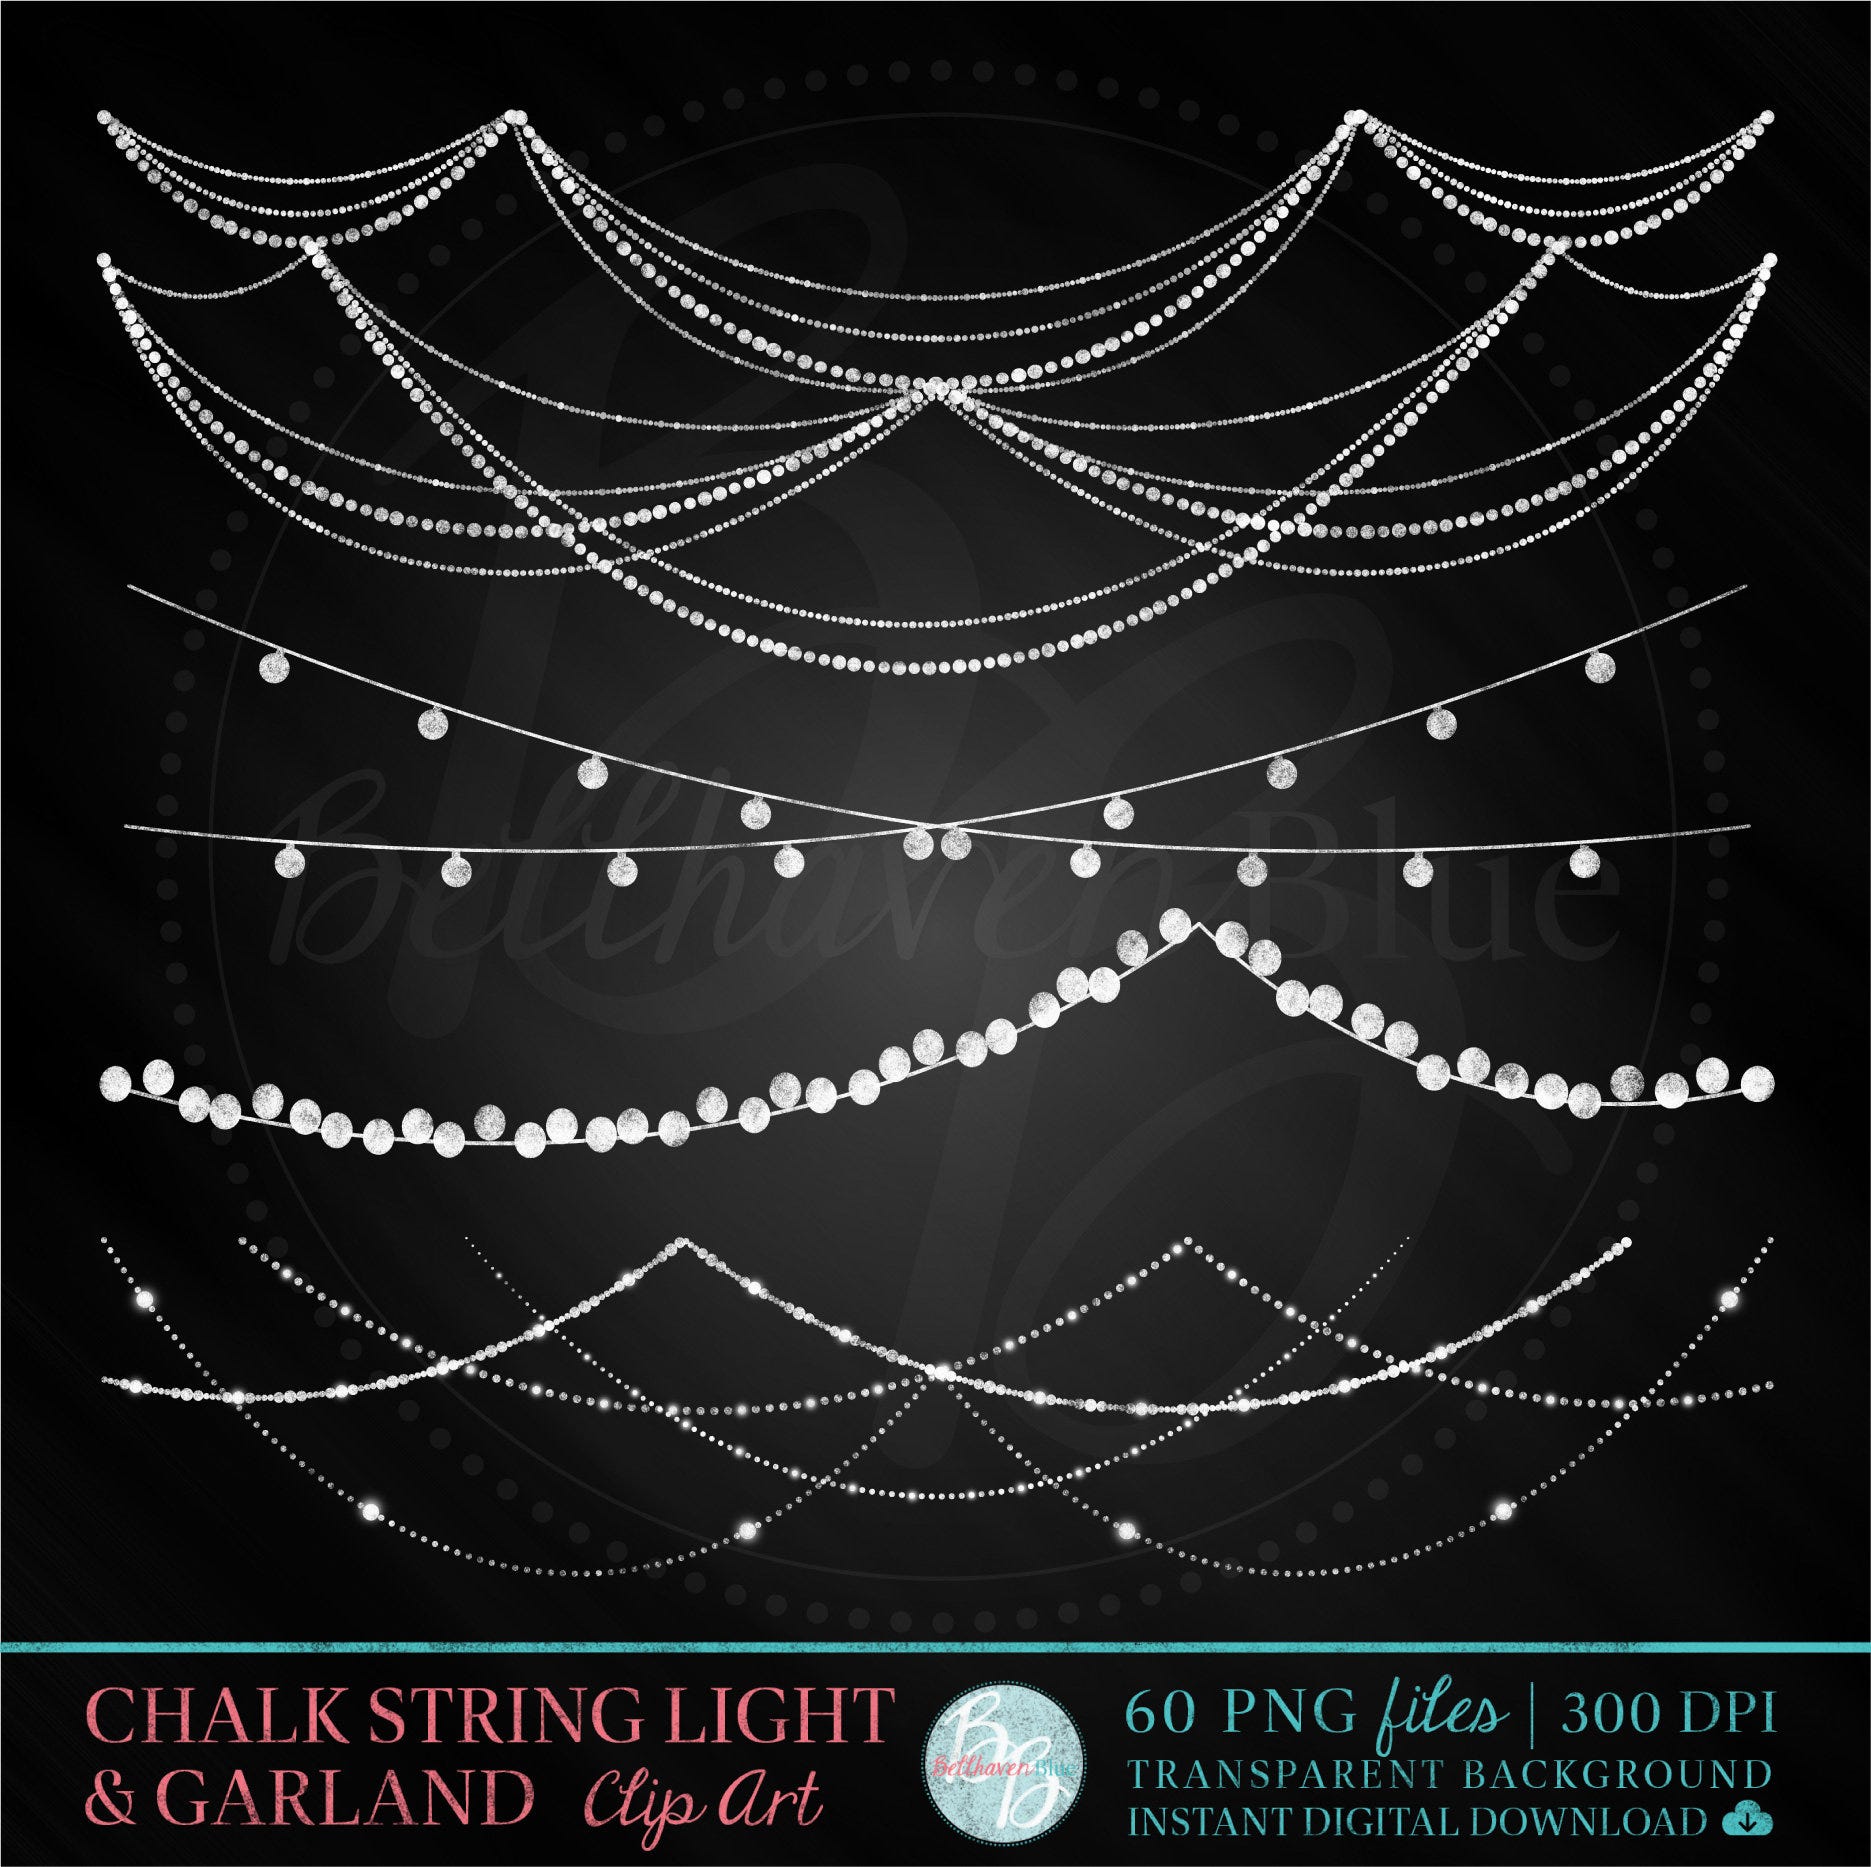 Chalkboard String Light & Garland Clipart, Instant Download, Chalk Graphics, Digital Paper, White Clipart, Invitation, Scrapbooking, Overlay